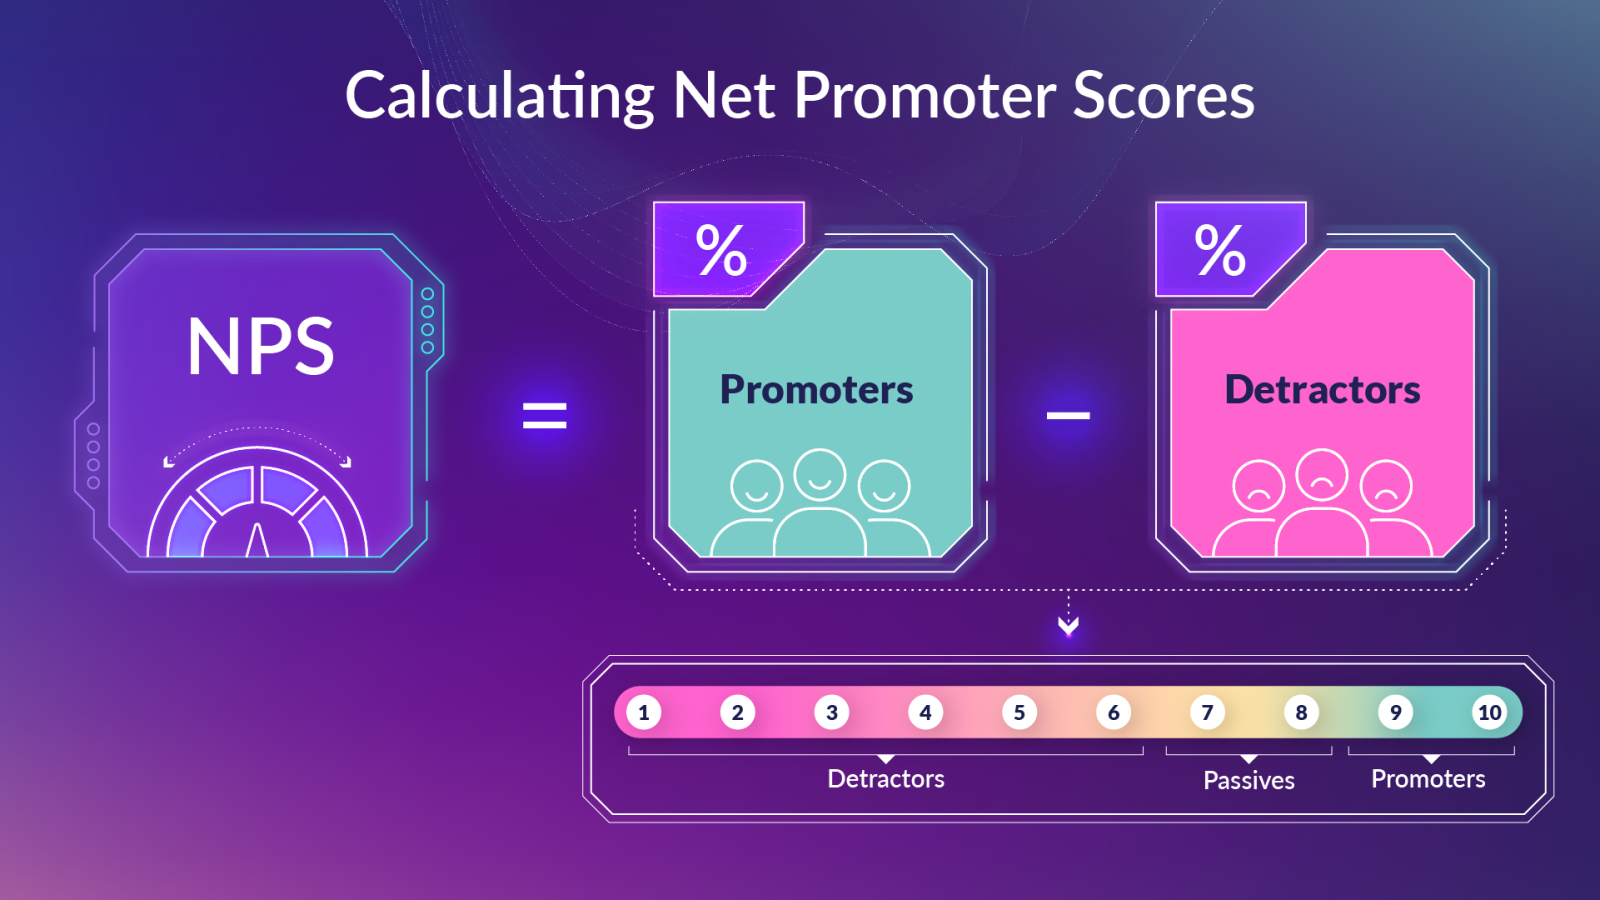 What is a Good Net Promoter Score? (2023 NPS Benchmark)